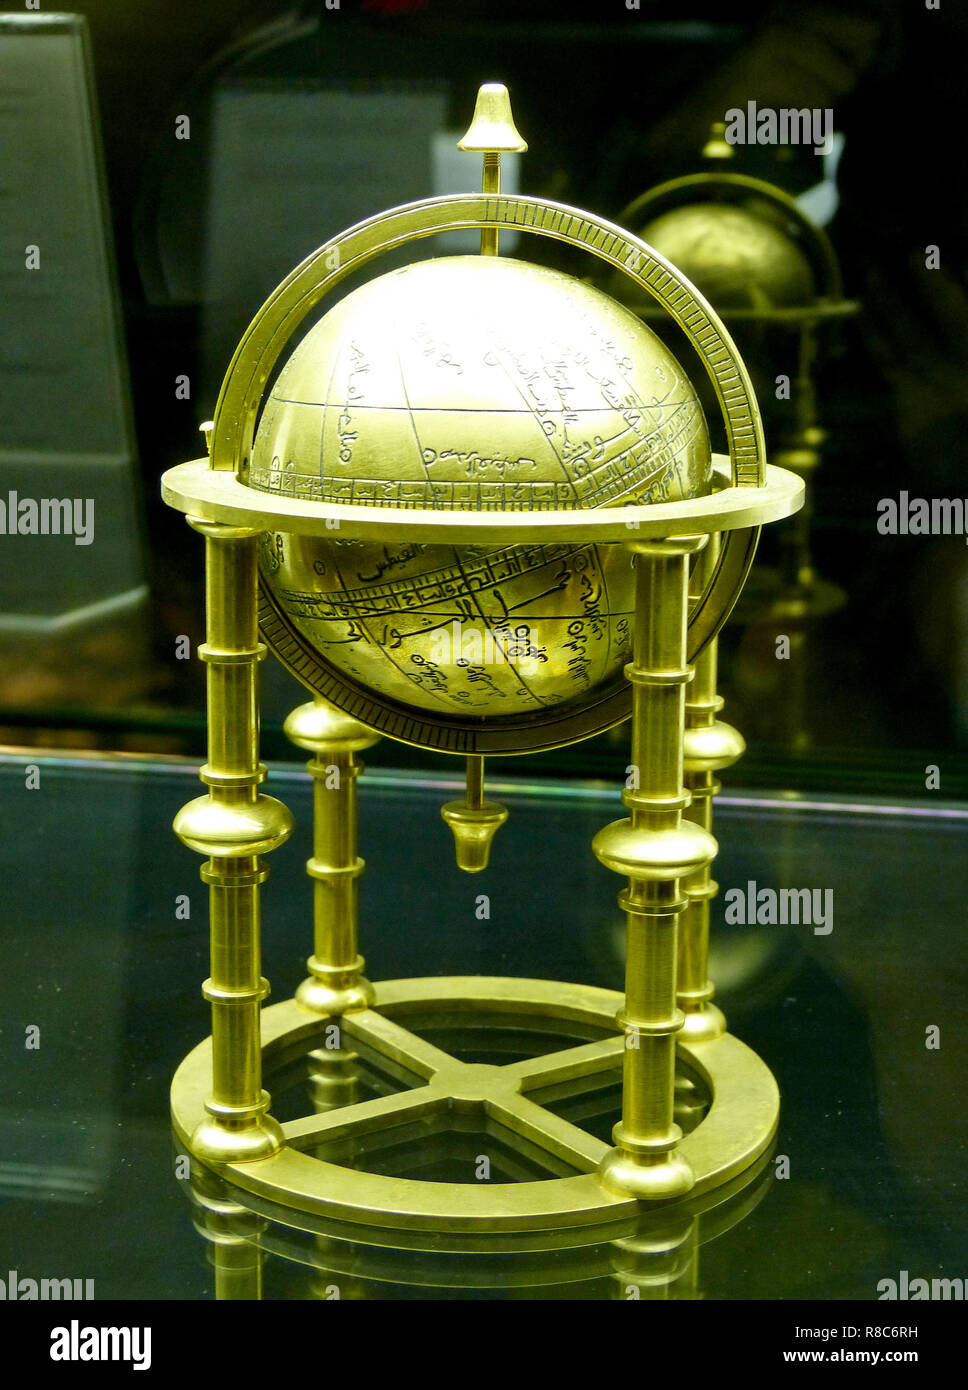 Istanbul, Turkey - March 29, 2013. Old Middle Eastern globe on display at Istanbul Museum of the History of Science and Technology in Islam. Stock Photo